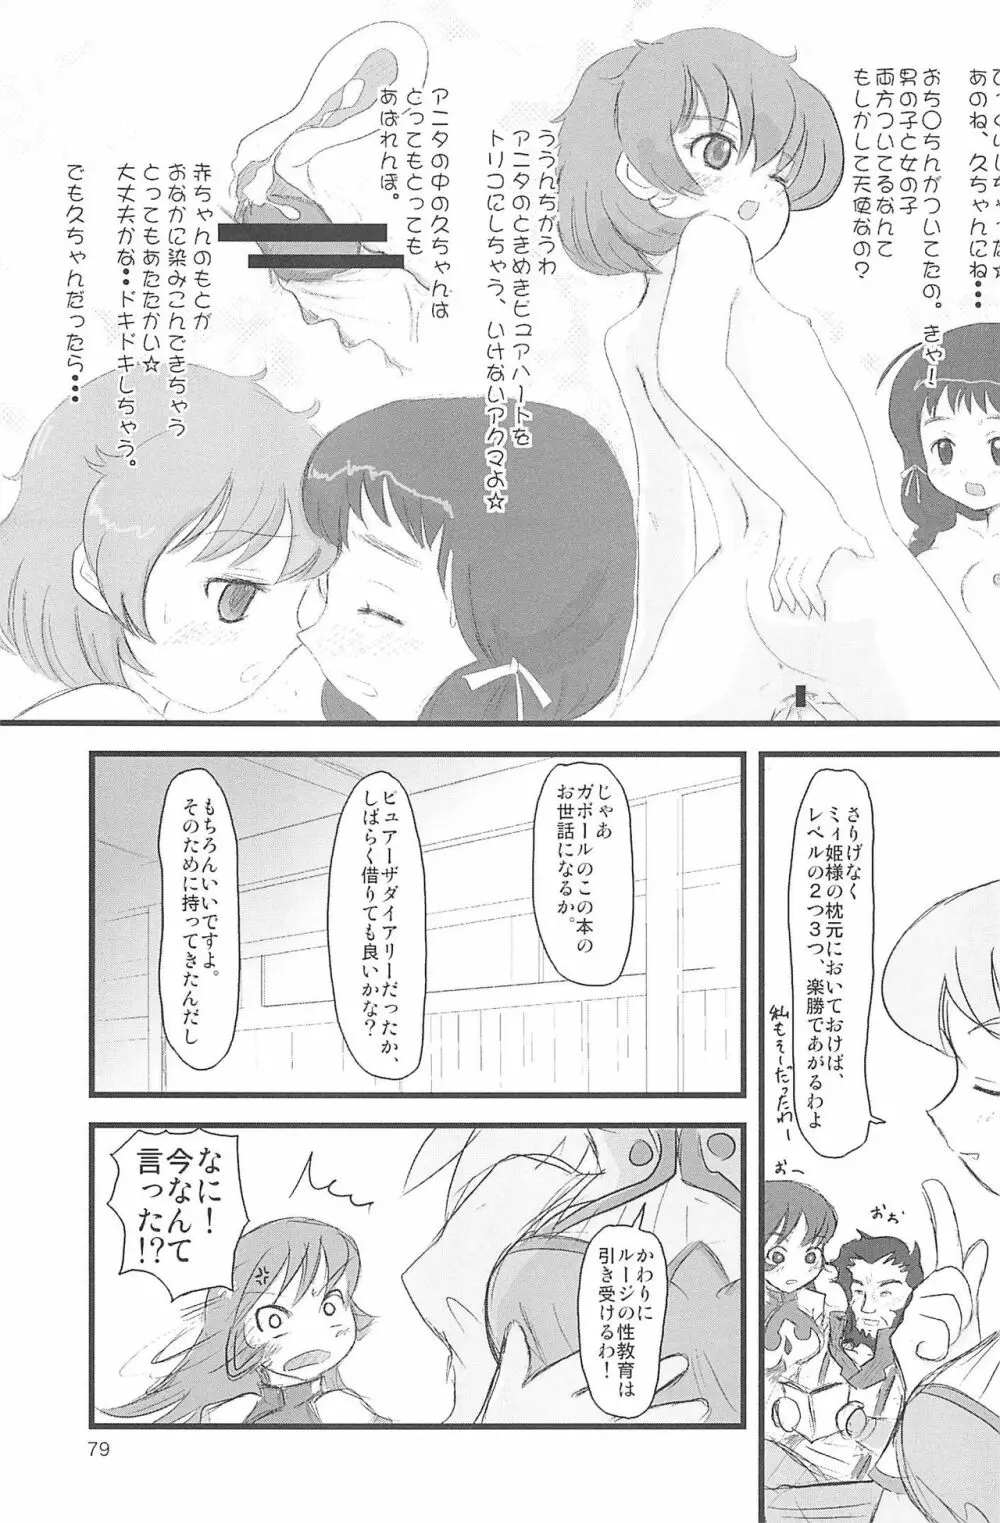 ND-special Volume 5 79ページ